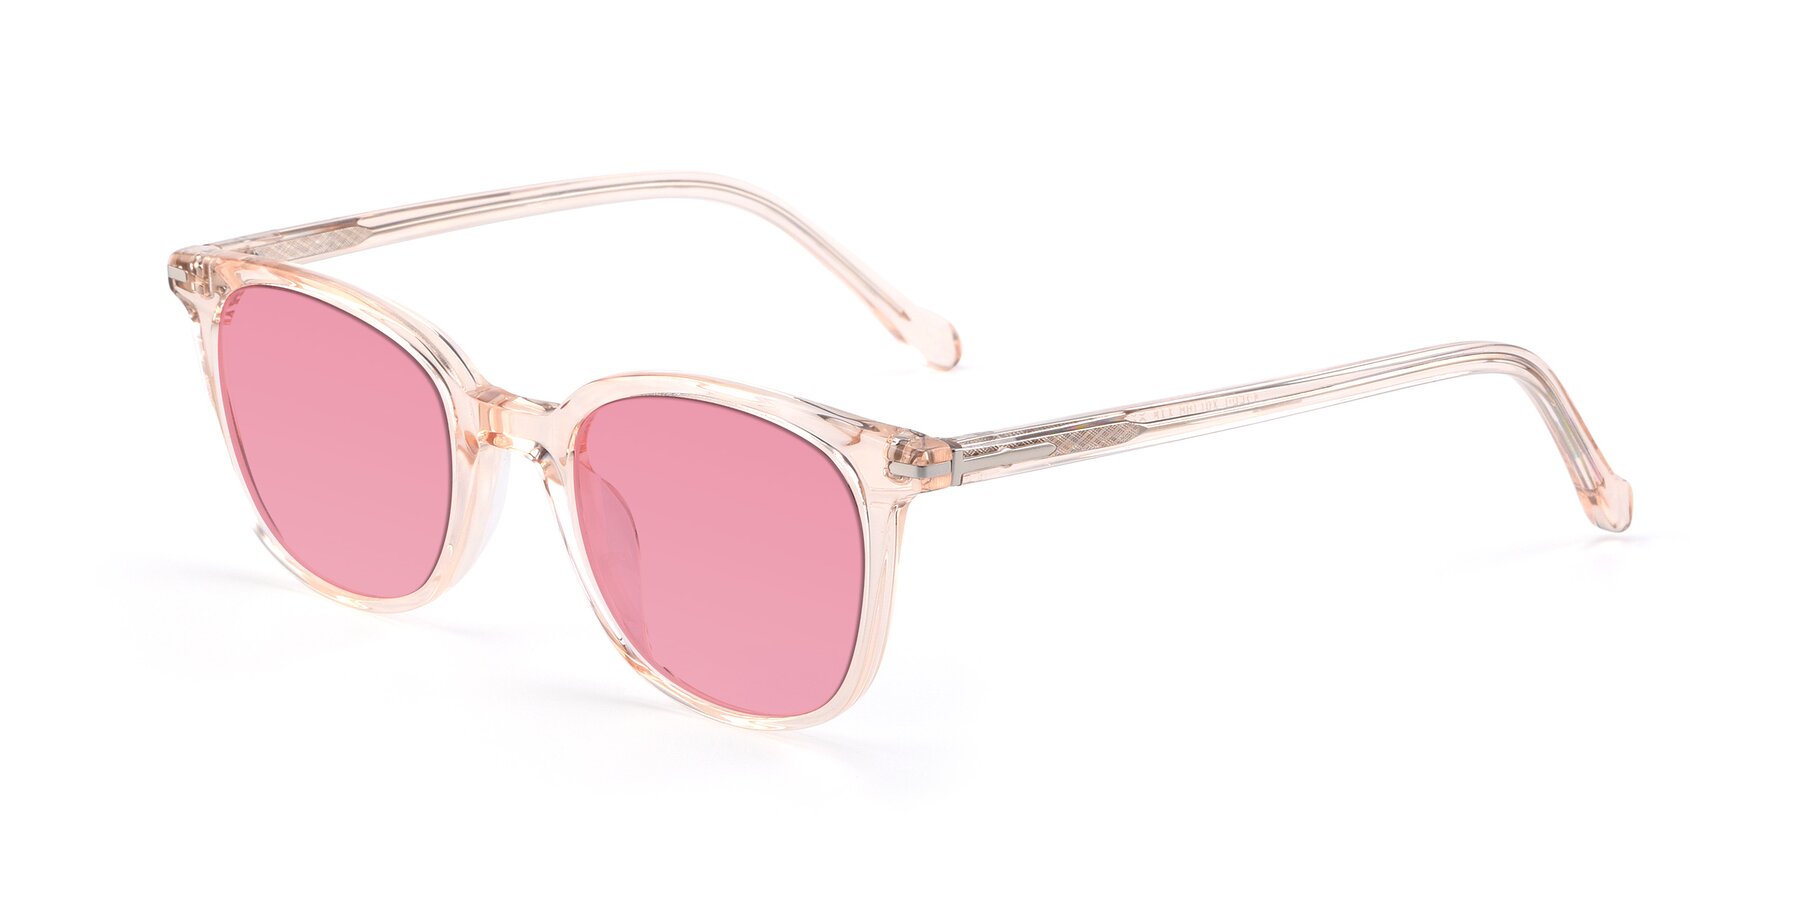 Angle of 17562 in Transparent Pink with Pink Tinted Lenses